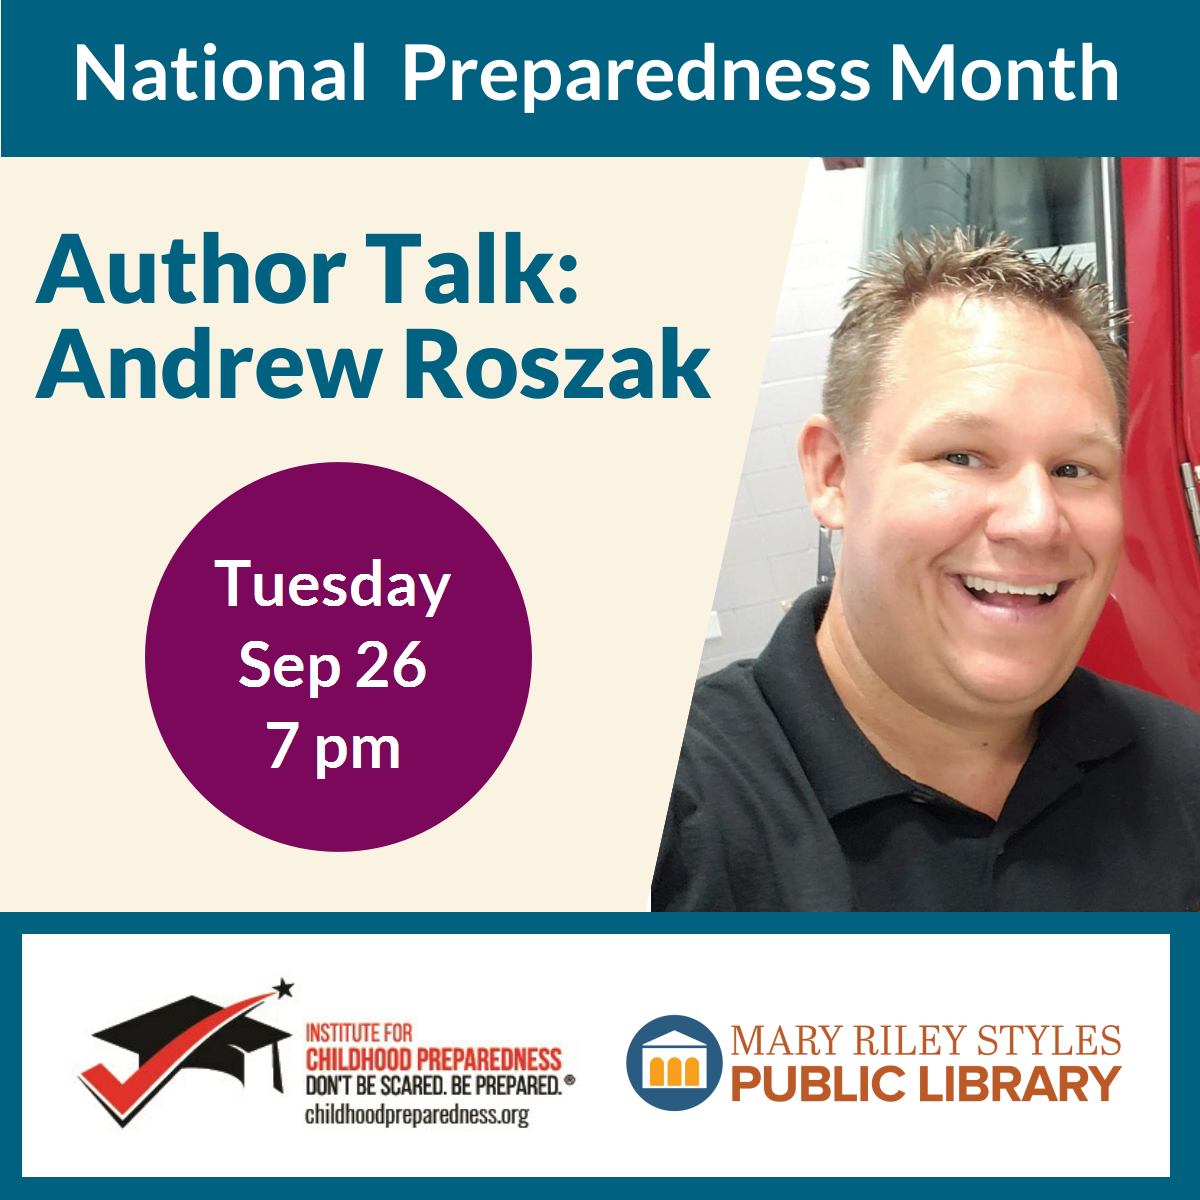 National Preparedness Month Author Talk with Andrew Roszak Tuesday September 26 at 7 pm